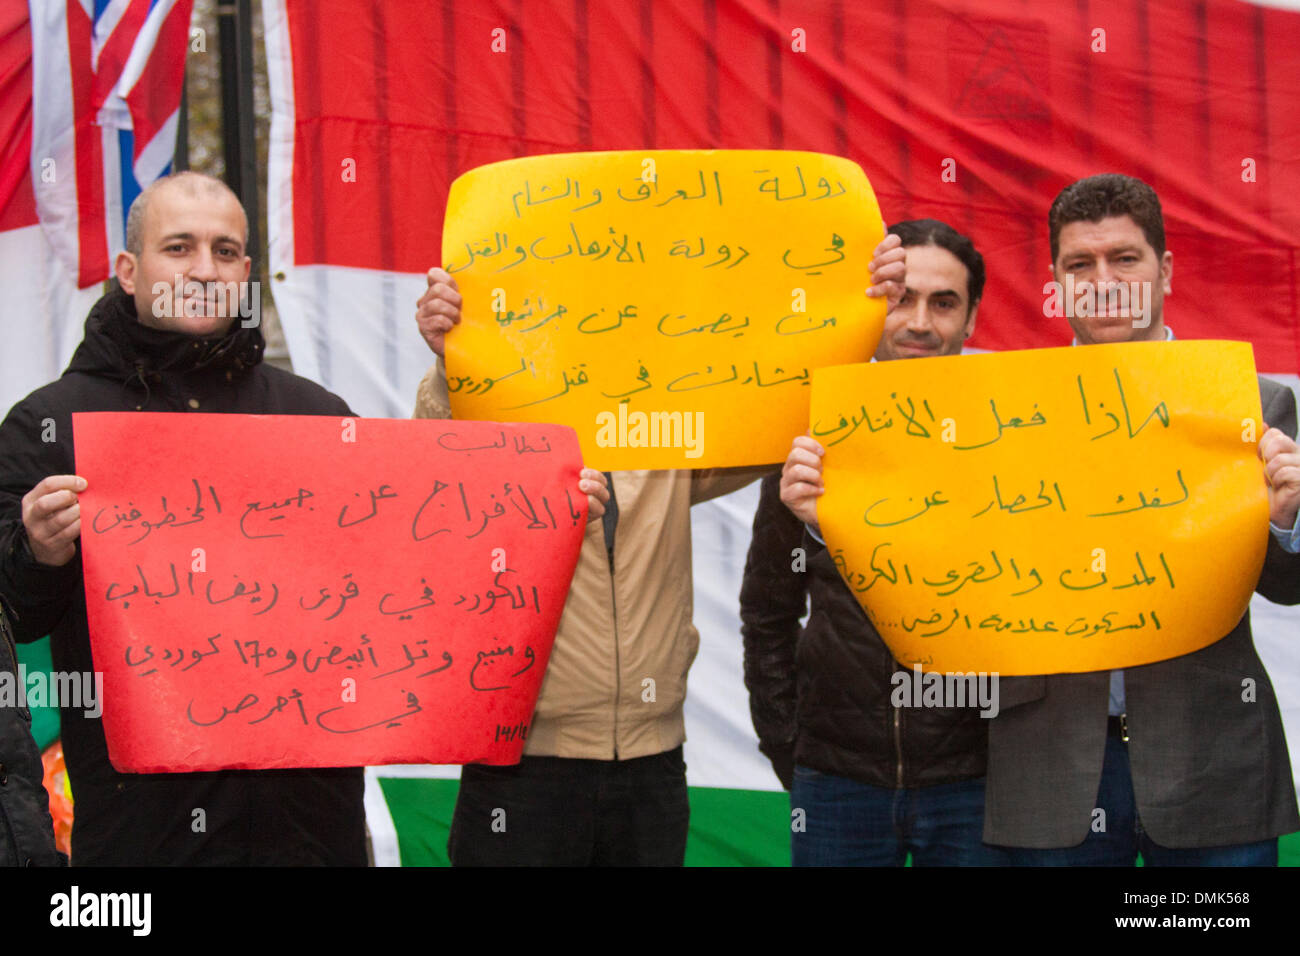 London, UK. 14th December 2013. Protesters display their placards as Kurds demand that the Kurdish issue in Syria is added to the agenda of the January 2014 Geneva II peace conference. Credit:  Paul Davey/Alamy Live News Stock Photo